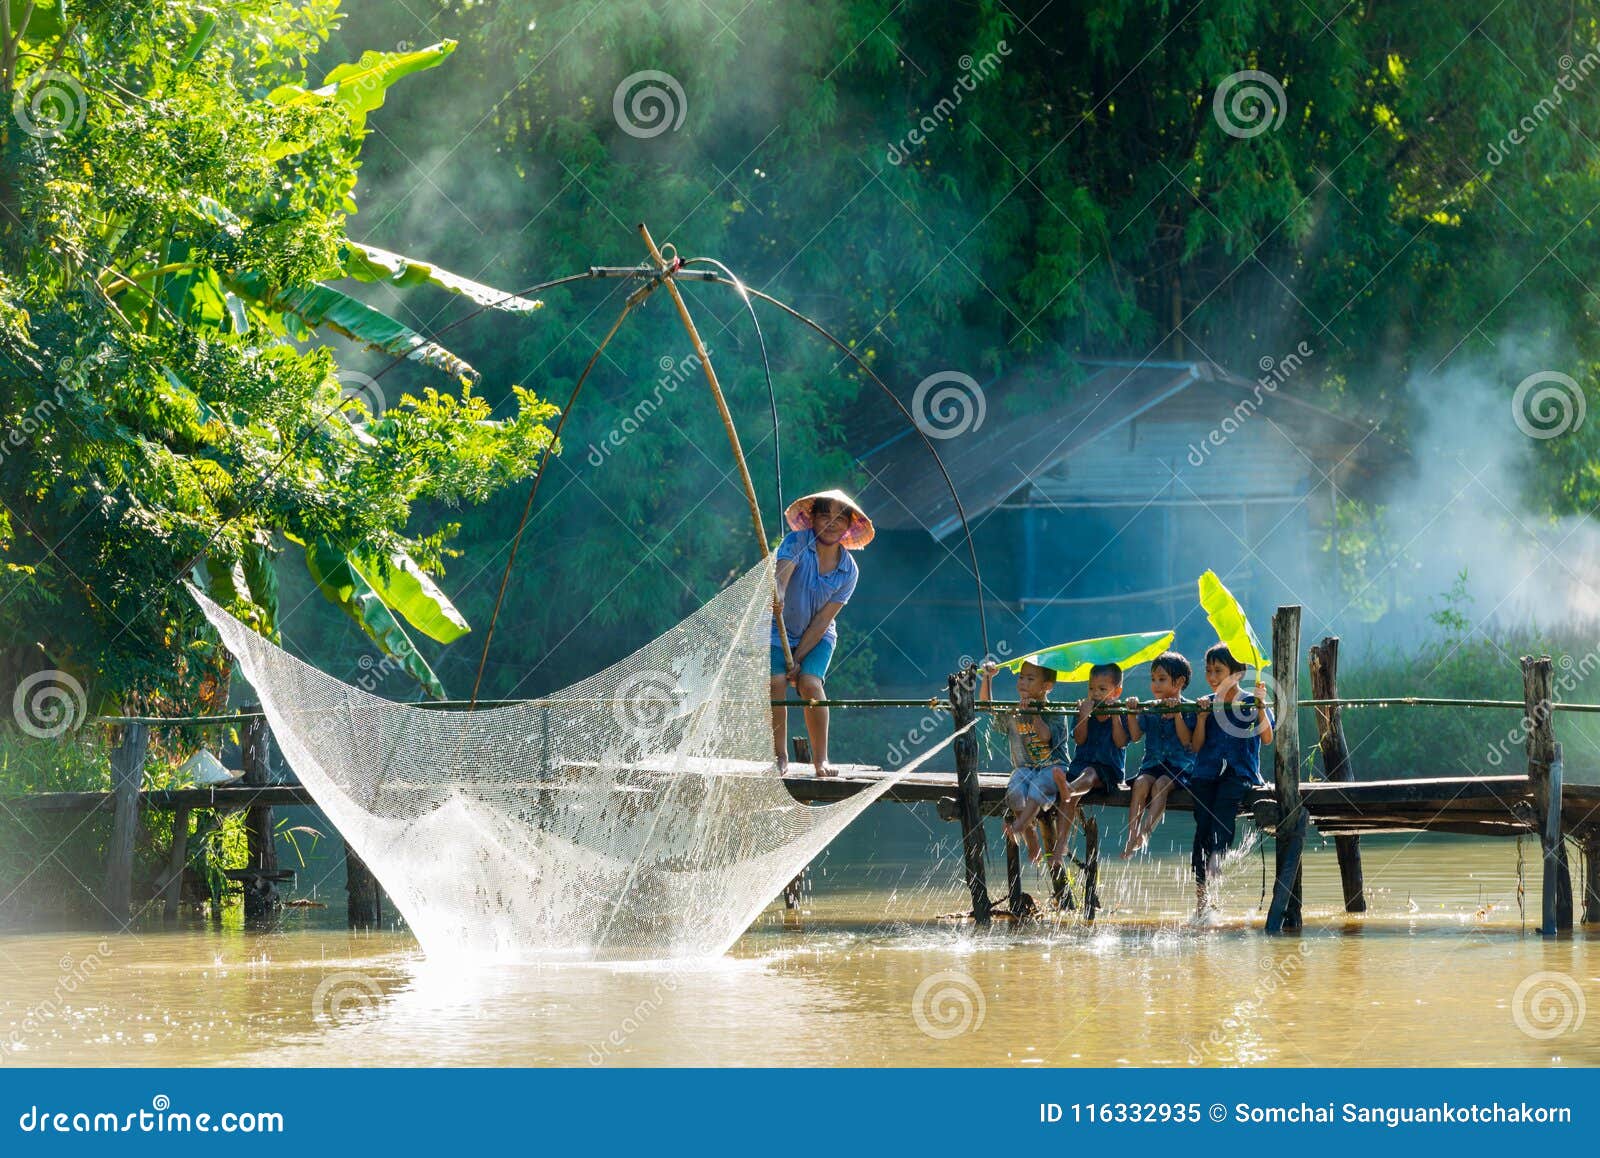 Rural Man Fishing by Fishing Net while Group of Rural Children